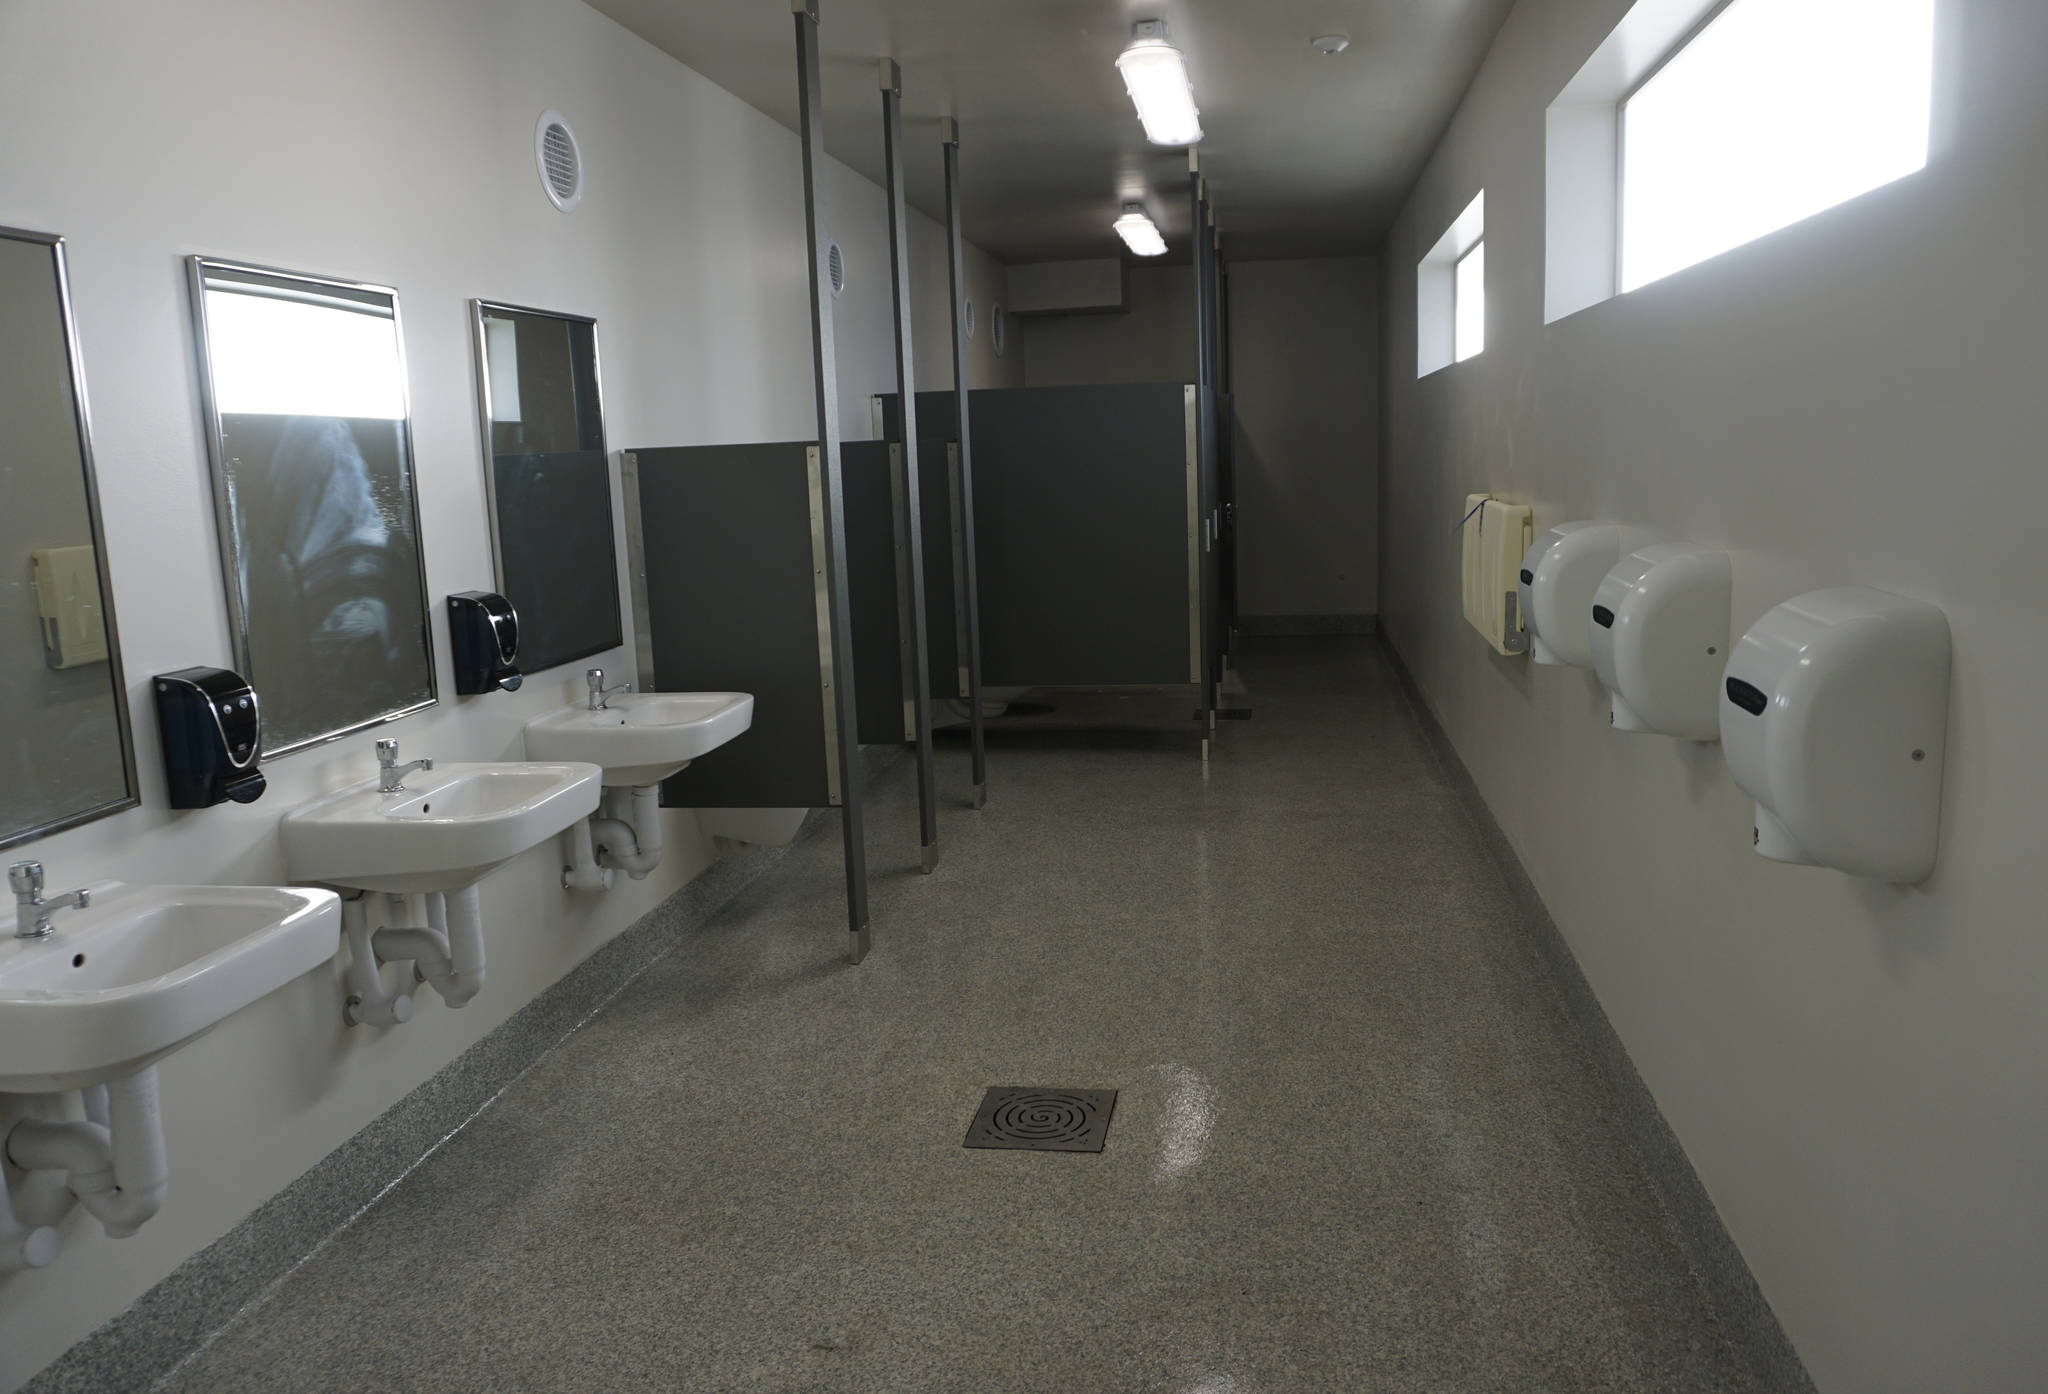 The inside of the men’s restroom at the new Ramp 2 restrooms on the Homer Spit in Homer, Alaska, on Feb. 8, 2019. The restrooms opened on Feb. 2. (Photo by Michael Armstrong/Homer New